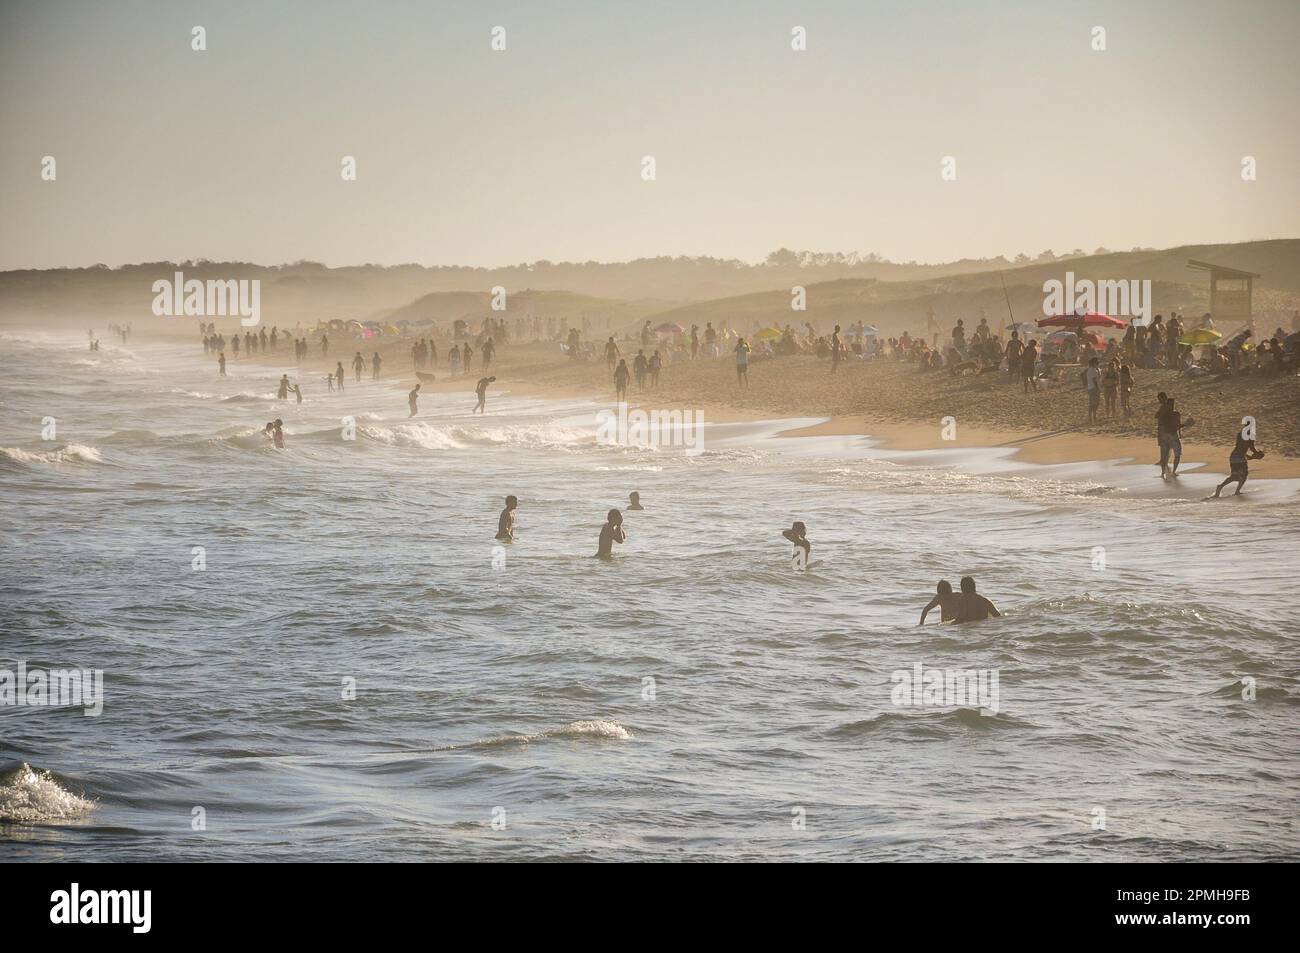 dozens of people bathing in one of the beaches of Punta del Diablo, during sunset Stock Photo